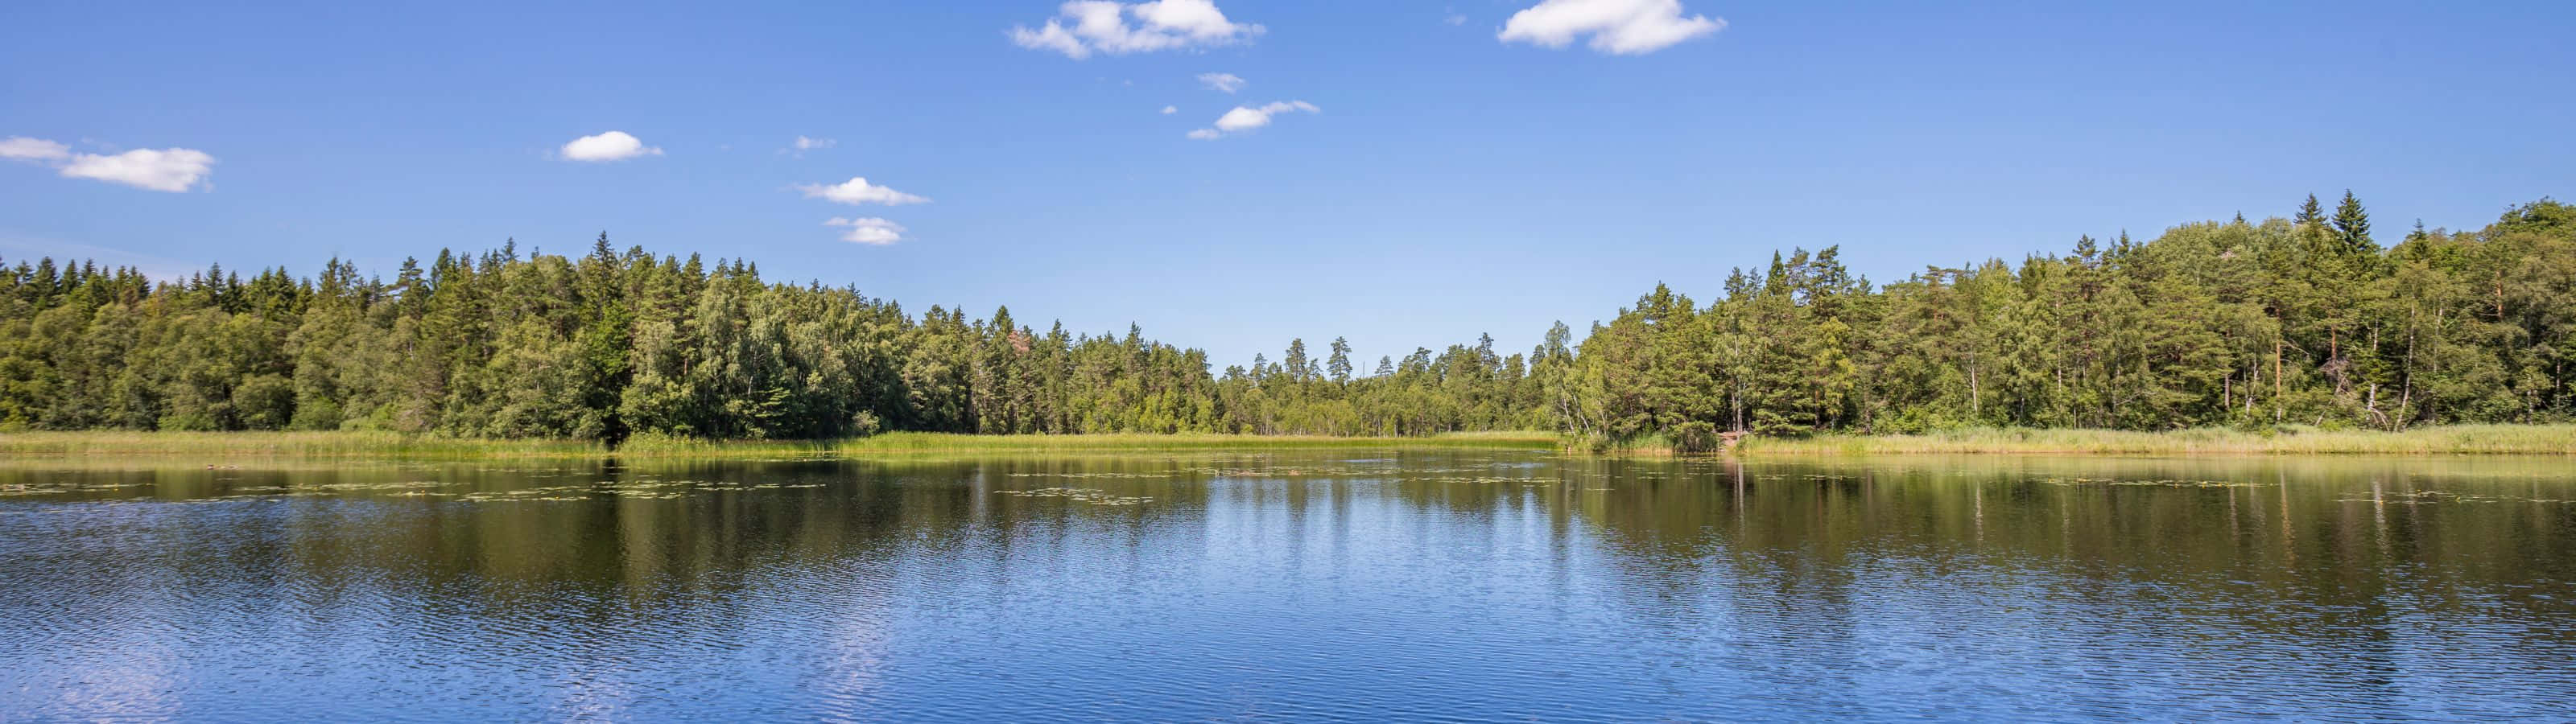 A Lake Surrounded By Trees And A Blue Sky Wallpaper